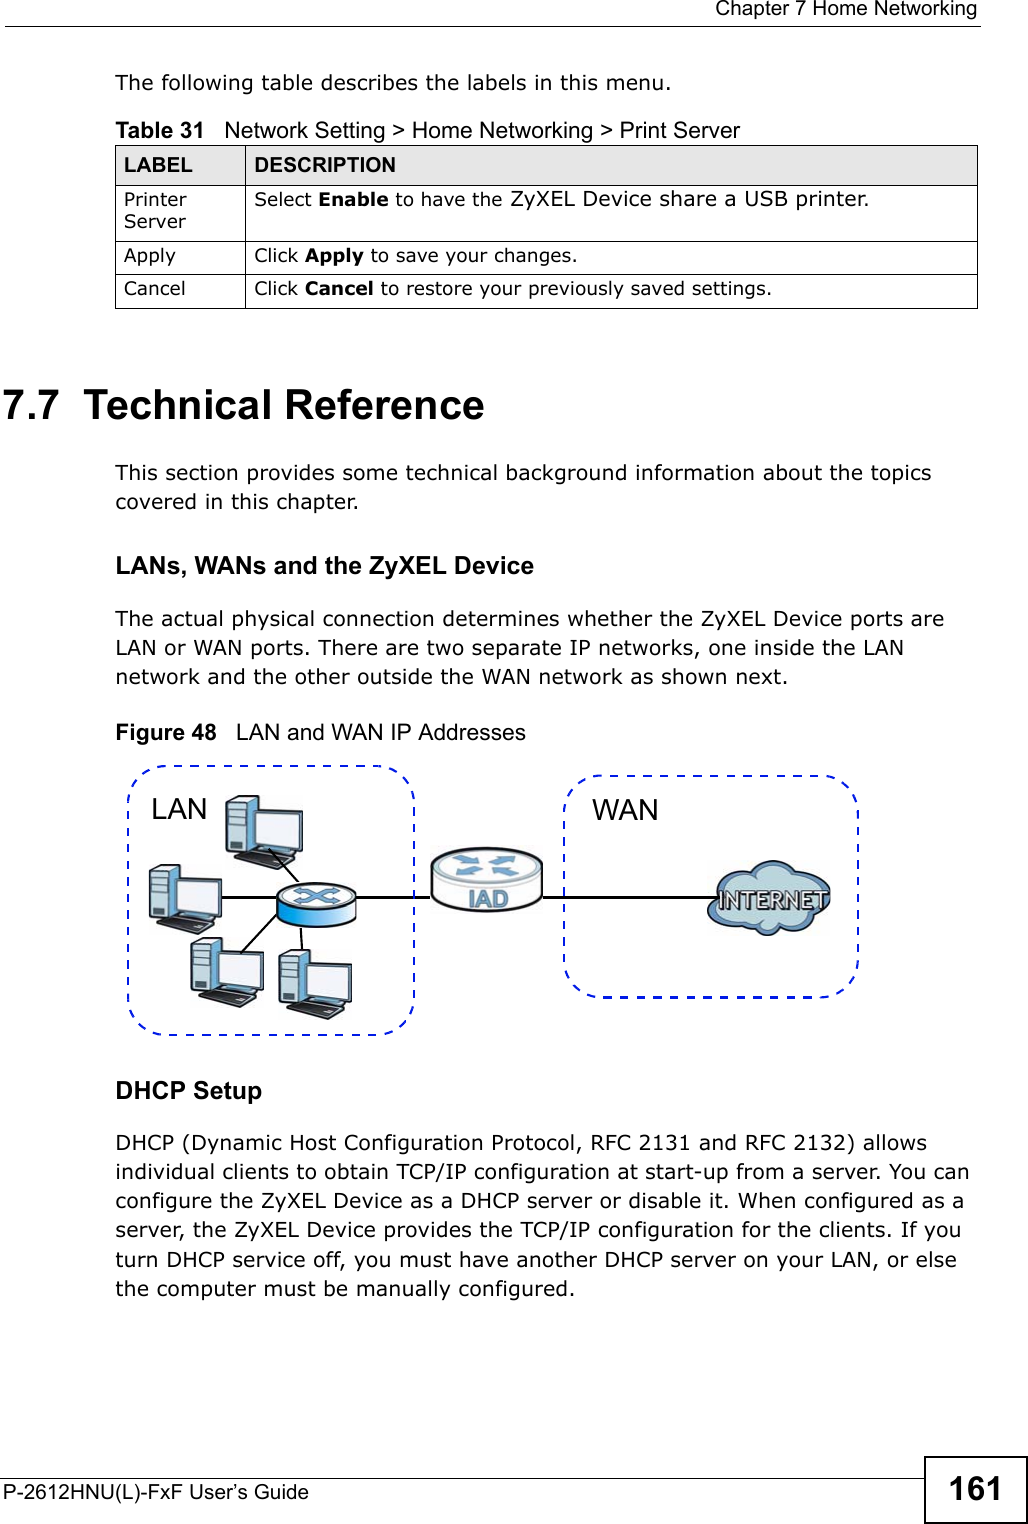  Chapter 7 Home NetworkingP-2612HNU(L)-FxF User’s Guide 161The following table describes the labels in this menu.7.7  Technical ReferenceThis section provides some technical background information about the topics covered in this chapter.LANs, WANs and the ZyXEL DeviceThe actual physical connection determines whether the ZyXEL Device ports are LAN or WAN ports. There are two separate IP networks, one inside the LAN network and the other outside the WAN network as shown next.Figure 48   LAN and WAN IP AddressesDHCP SetupDHCP (Dynamic Host Configuration Protocol, RFC 2131 and RFC 2132) allows individual clients to obtain TCP/IP configuration at start-up from a server. You can configure the ZyXEL Device as a DHCP server or disable it. When configured as a server, the ZyXEL Device provides the TCP/IP configuration for the clients. If you turn DHCP service off, you must have another DHCP server on your LAN, or elsethe computer must be manually configured.Table 31   Network Setting &gt; Home Networking &gt; Print ServerLABEL DESCRIPTIONPrinter Server Select Enable to have the ZyXEL Device share a USB printer.Apply Click Apply to save your changes.Cancel Click Cancel to restore your previously saved settings.WANLAN